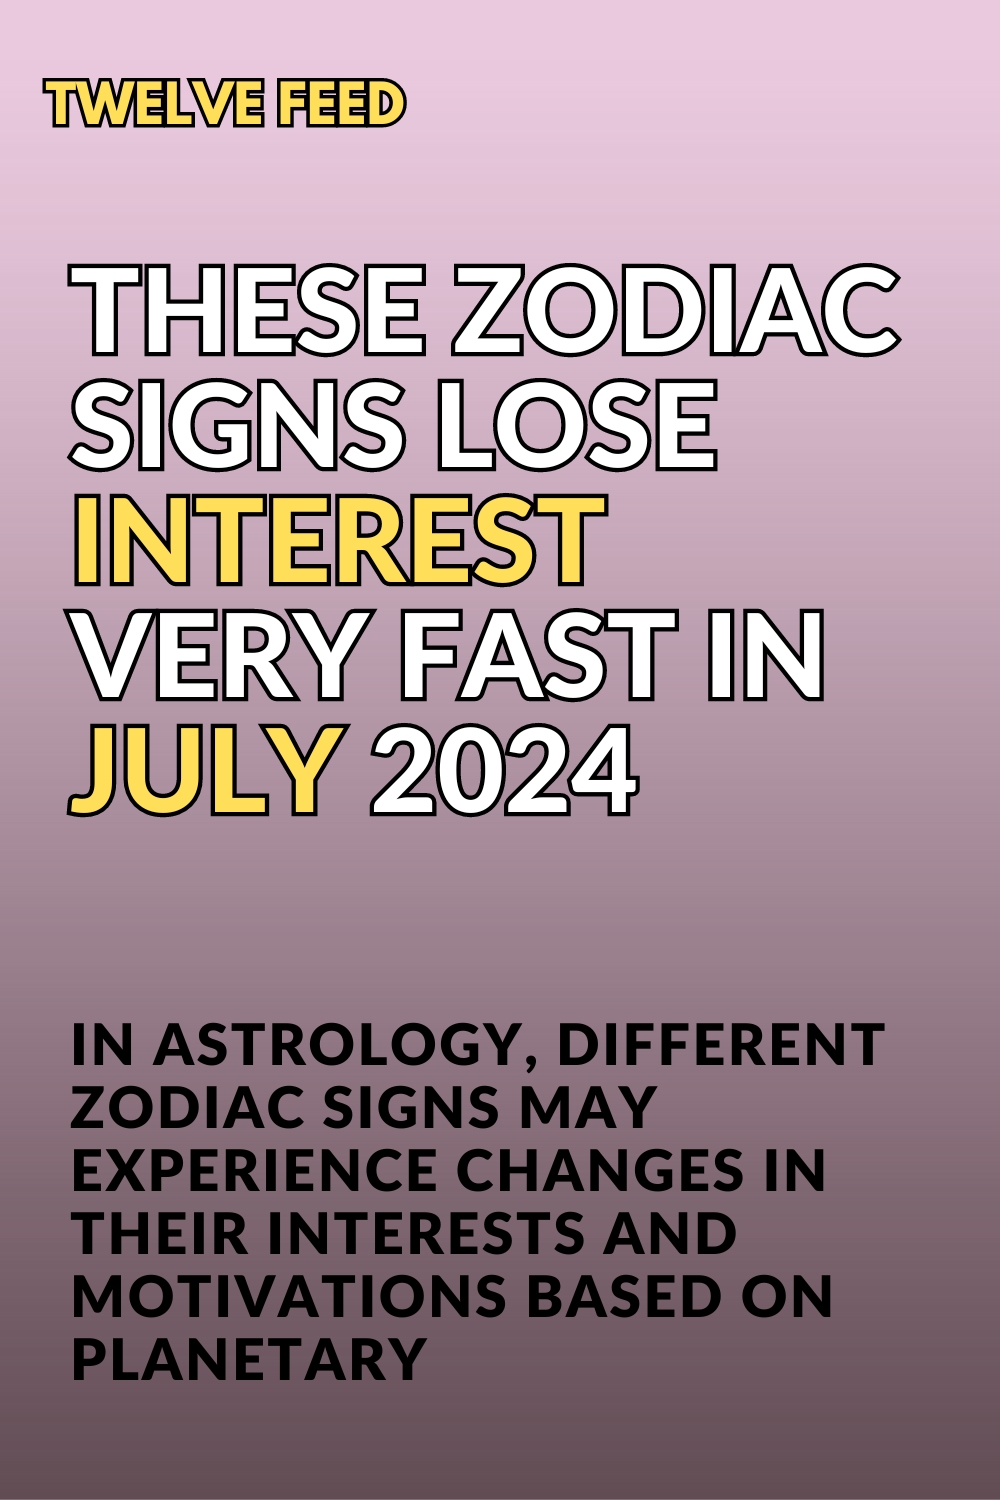 These Zodiac Signs Lose Interest Very Fast In July 2024